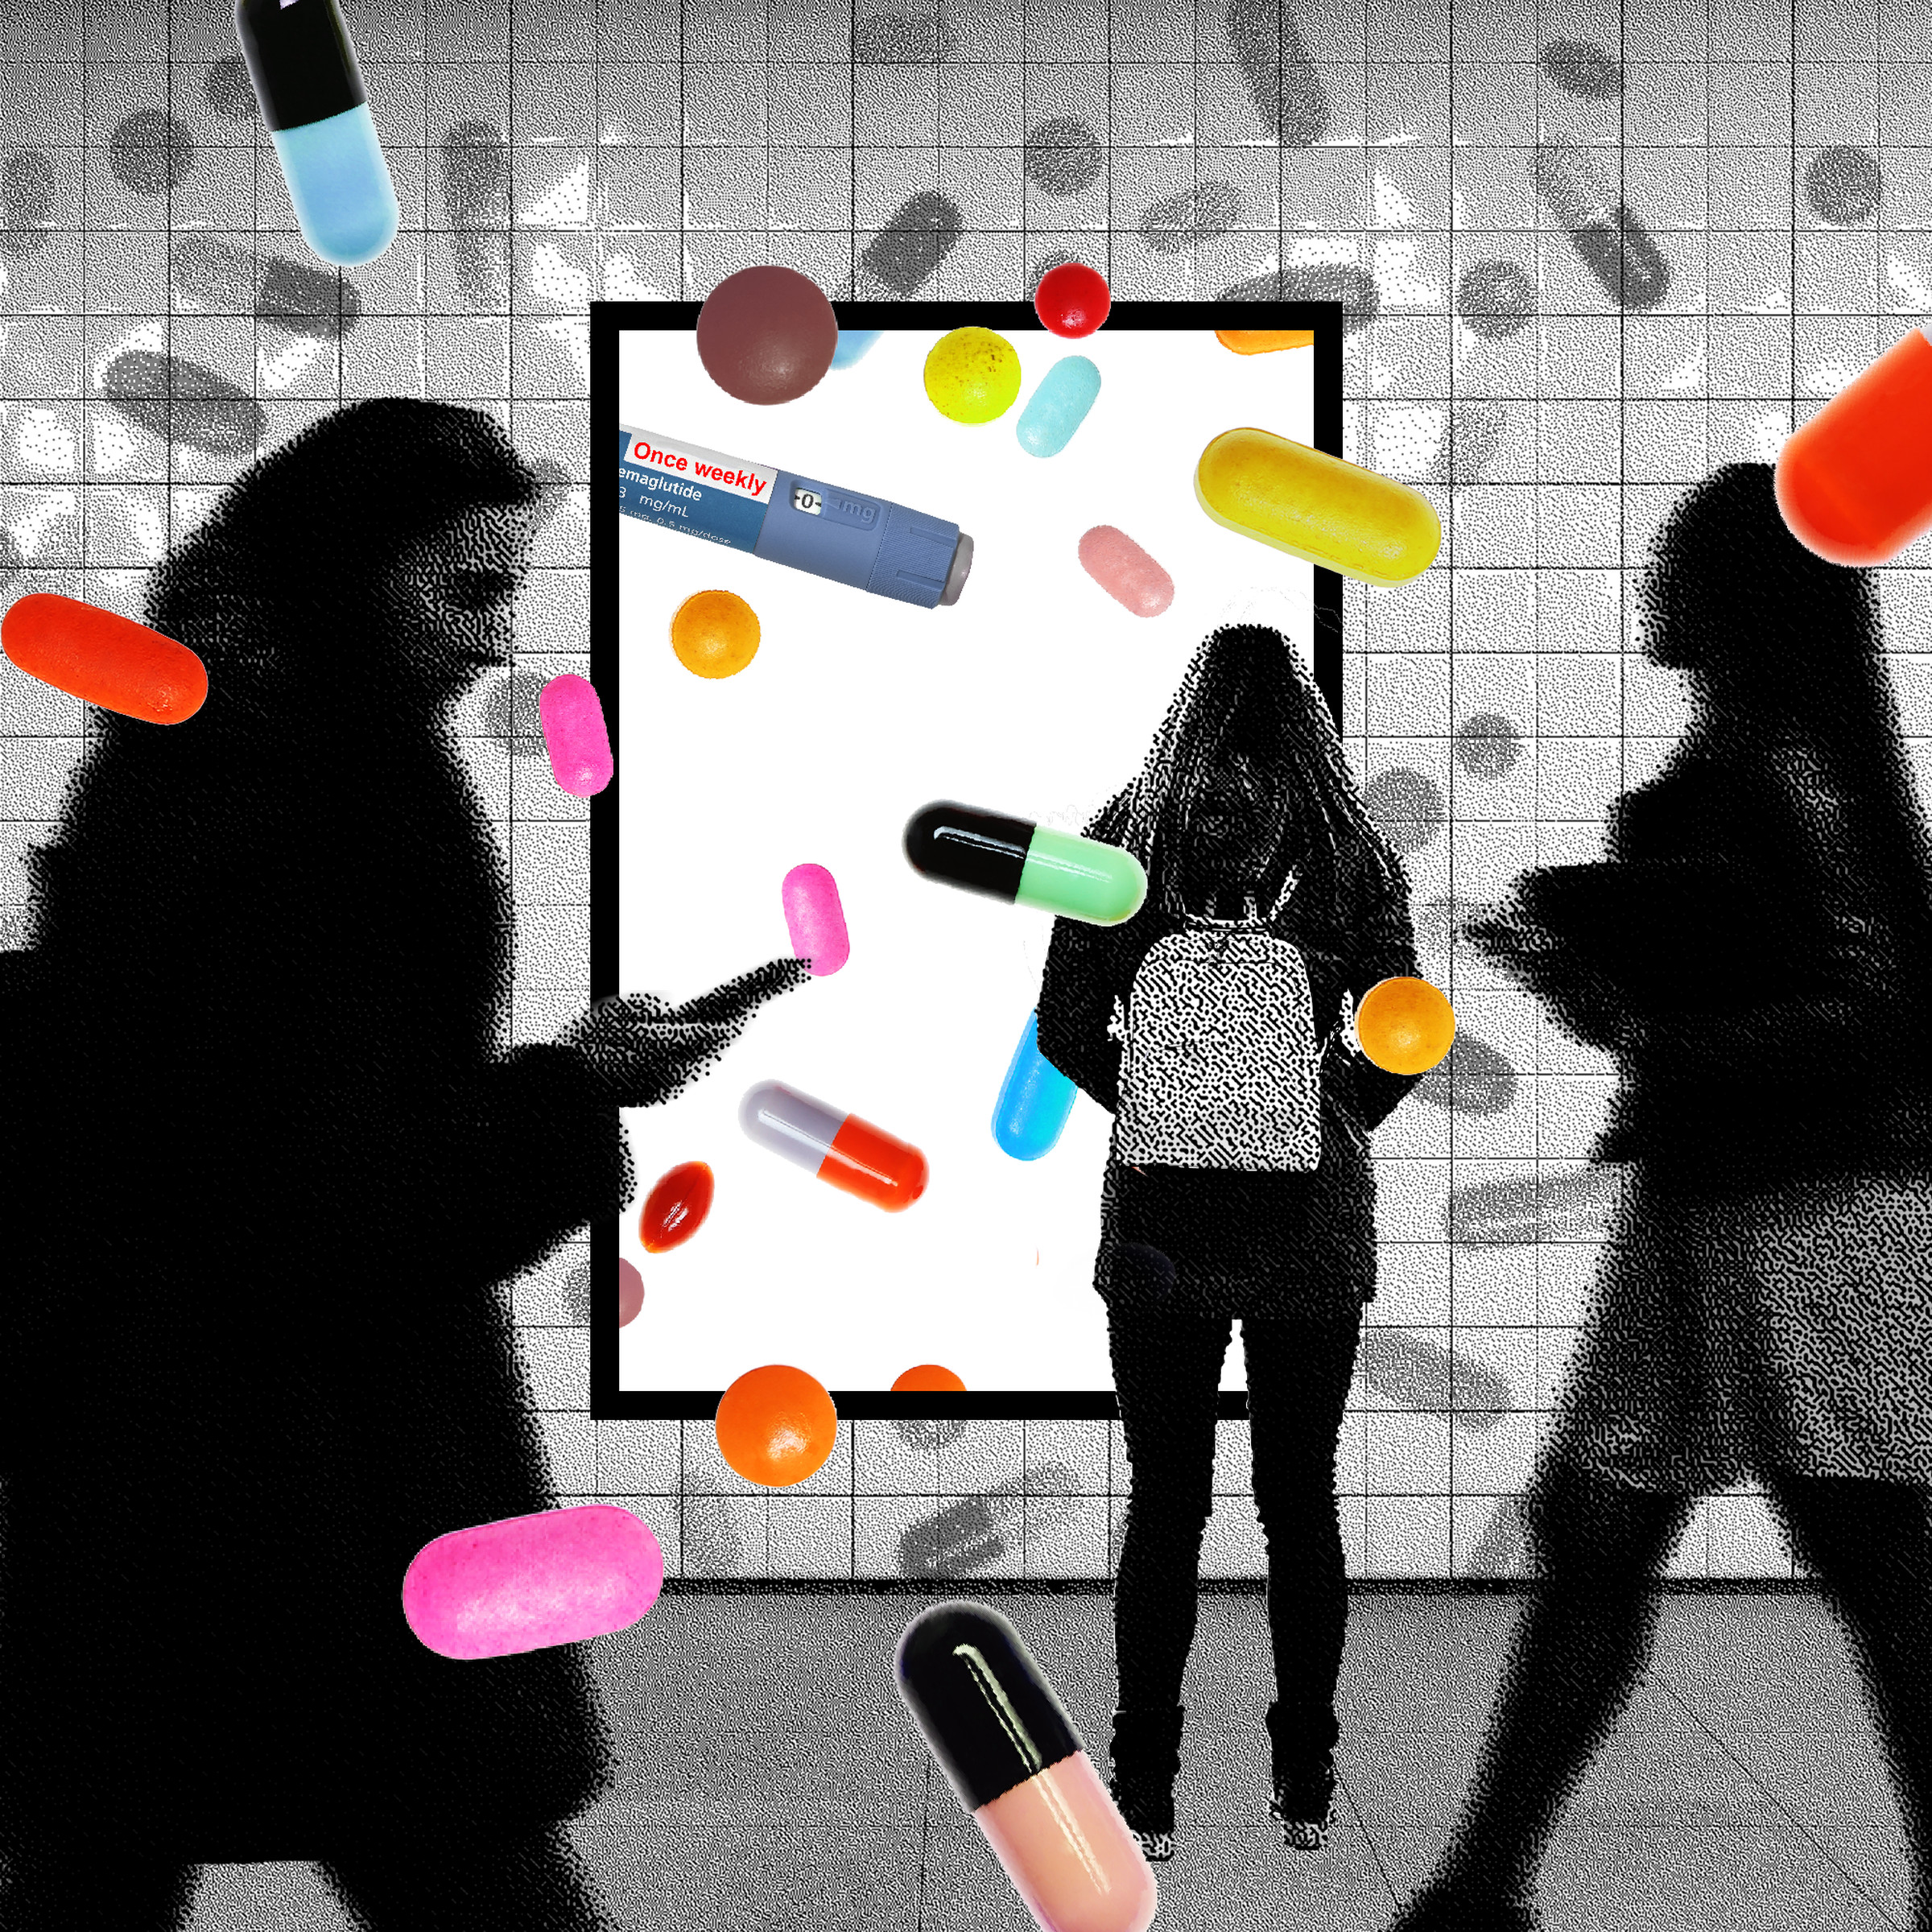 Photo illustration of commuters walking on a subway platform. Pills and medication of various sizes and colors are breaking through a subway and coming toward the viewer.